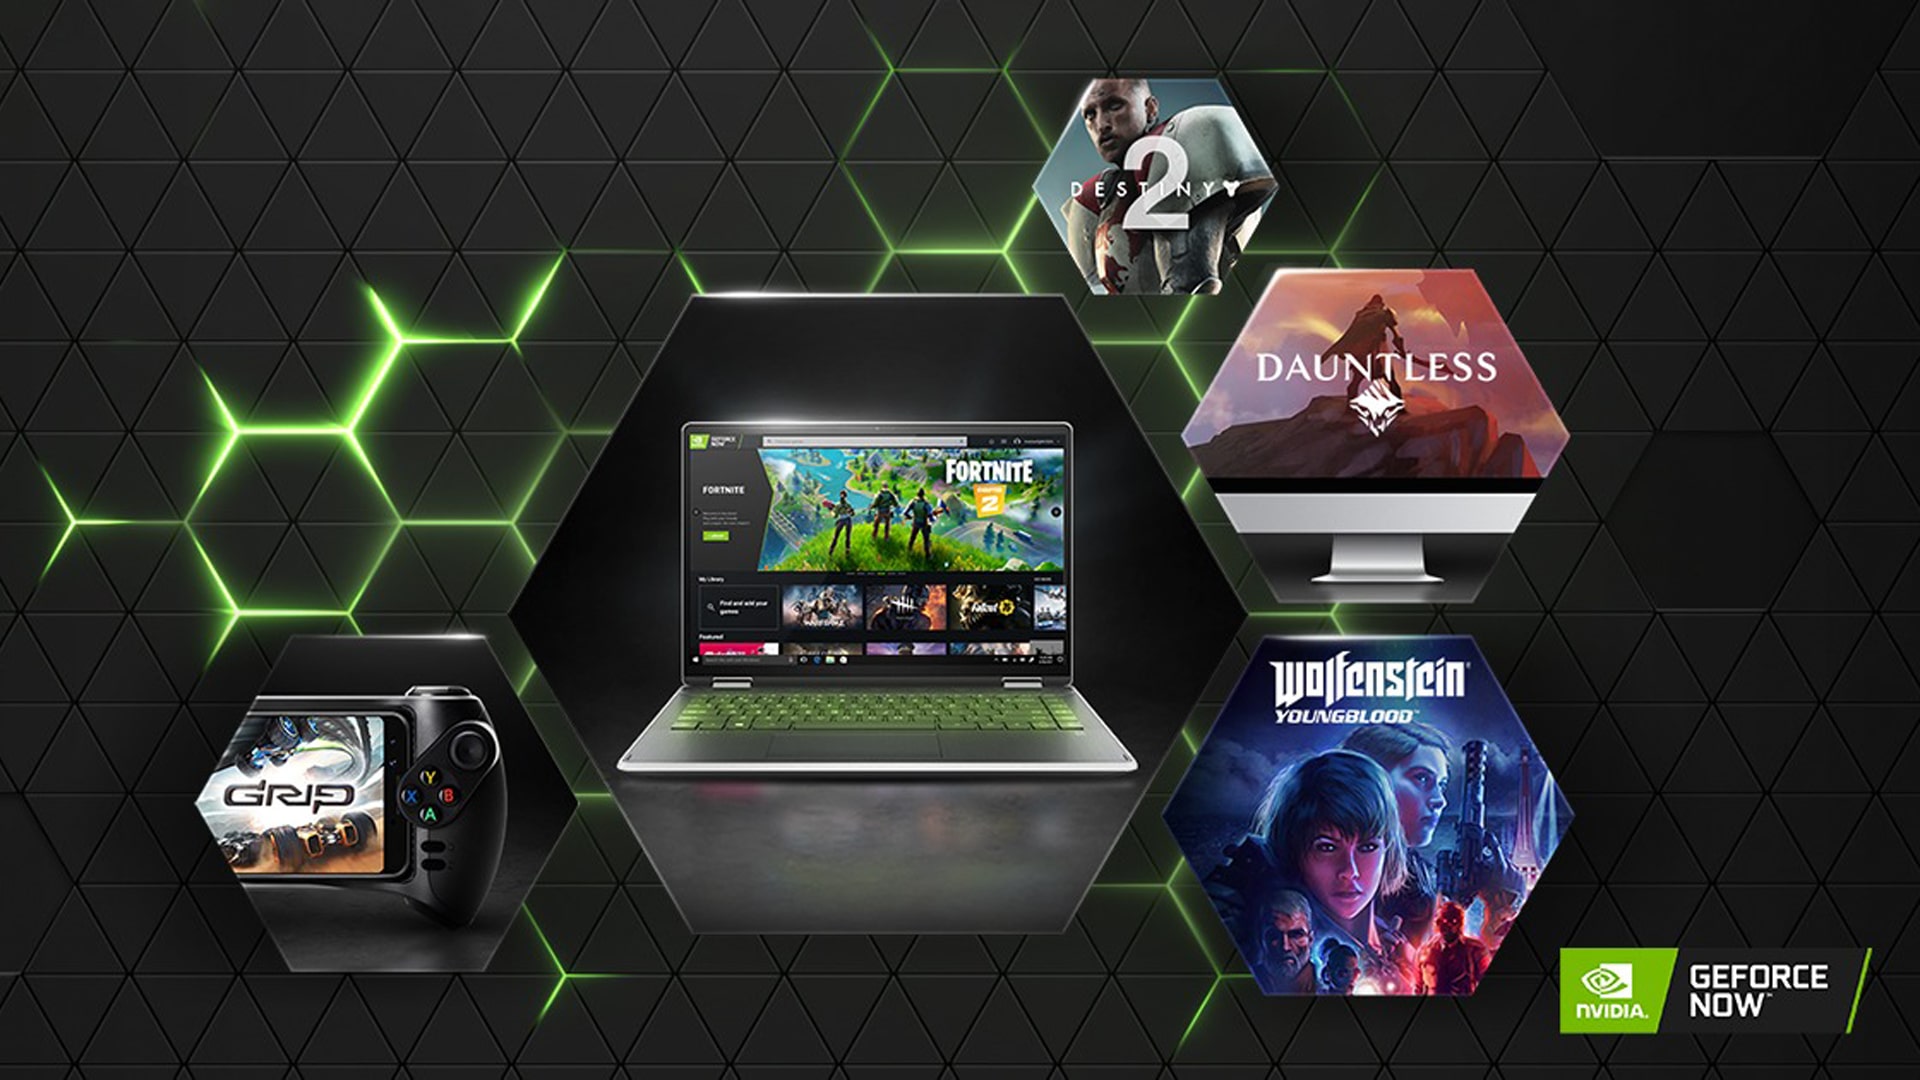 GeForce NOW Support Page for troubleshooting and assistance